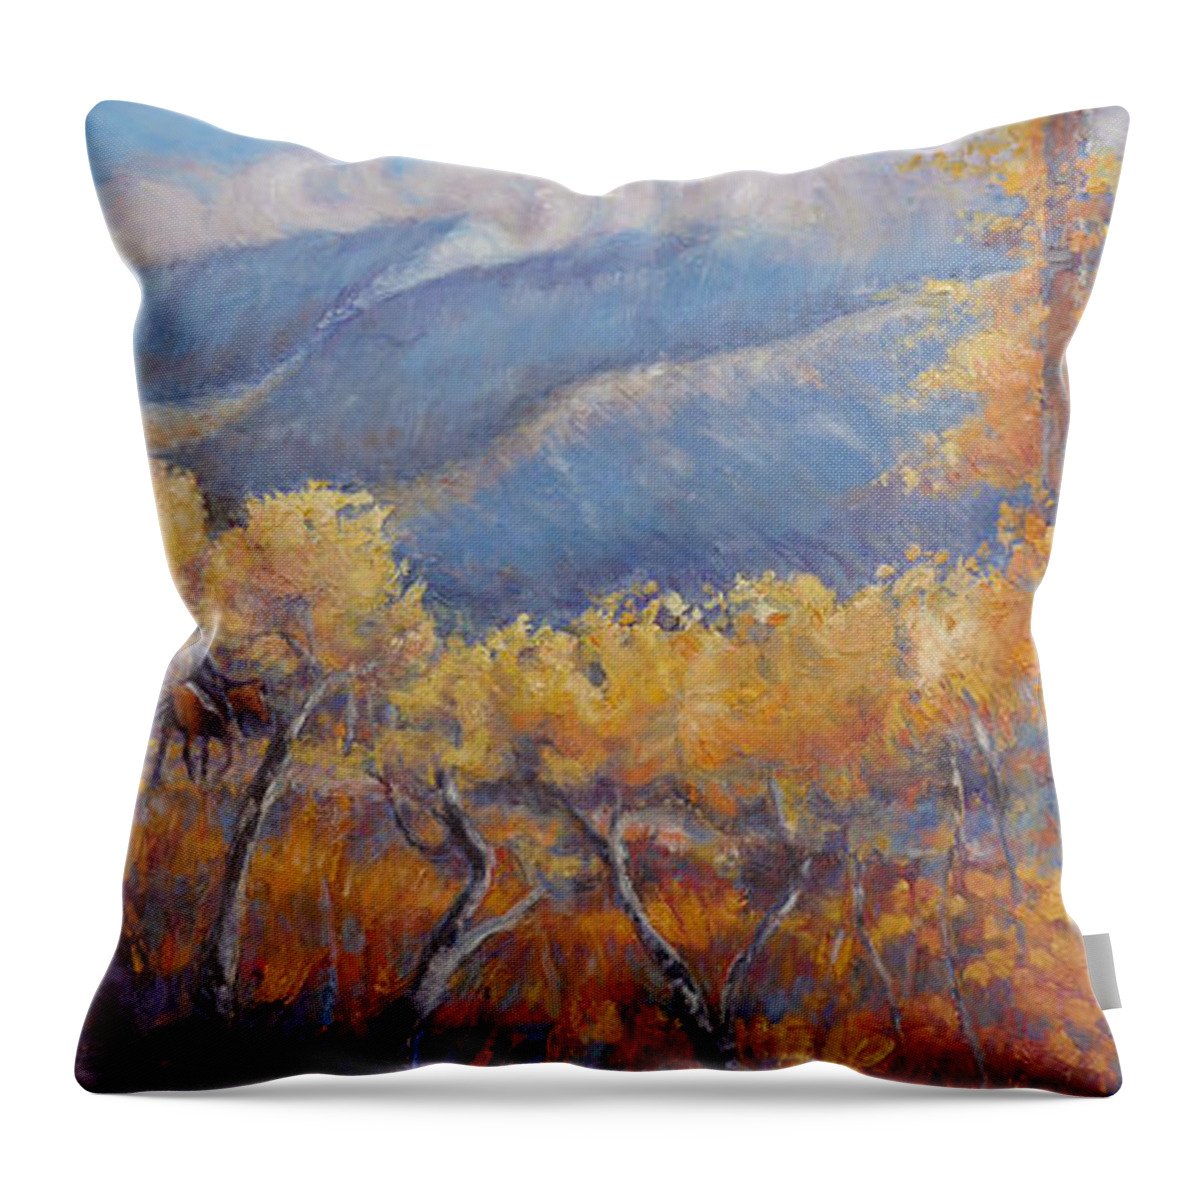 Oil On Panel Throw Pillow featuring the painting San Juan Mountain Gold by Gina Grundemann